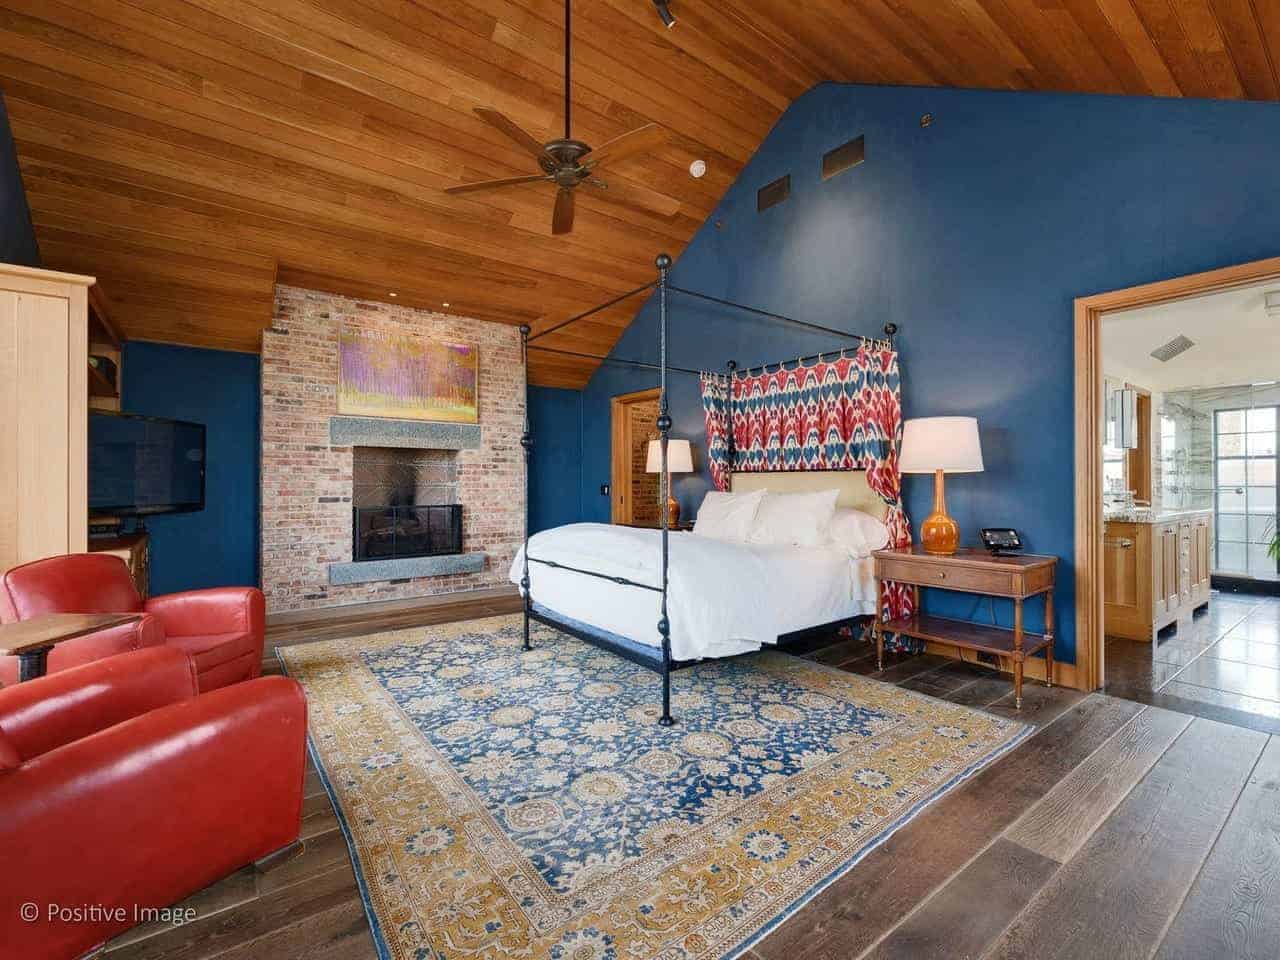 This industrial-style primary bedroom has the warm embrace of a traditional fireplace that is inlaid with red bricks. This stands out against the blue walls but complements the wooden cathedral ceiling that has a ceiling fan over the four-poster bed.